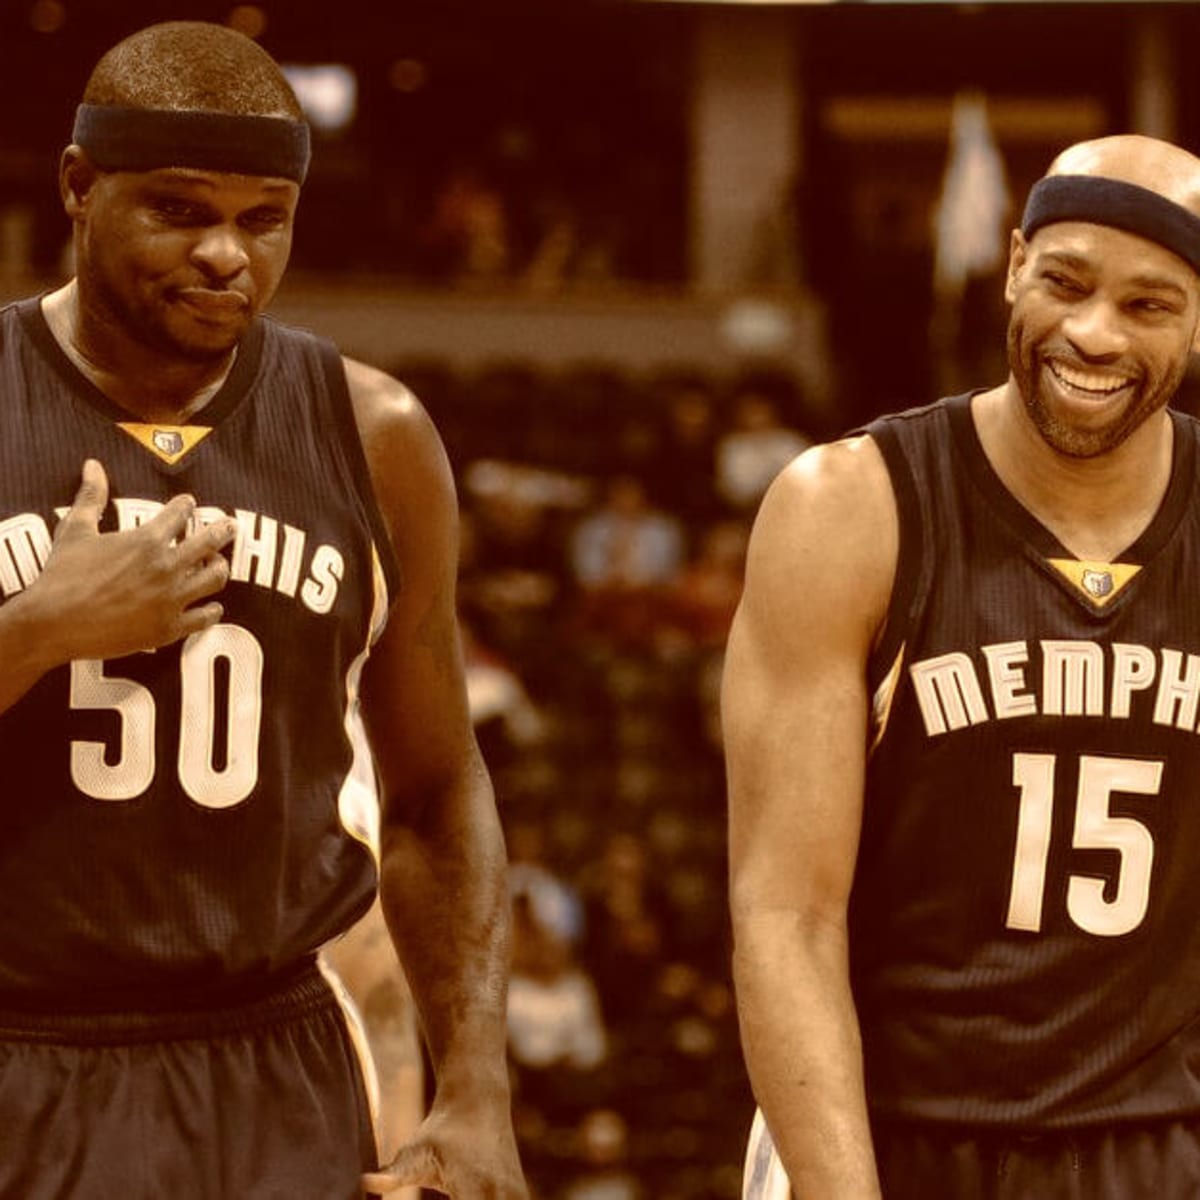 Zach Randolph reflects ahead of Memphis Grizzlies retiring his jersey